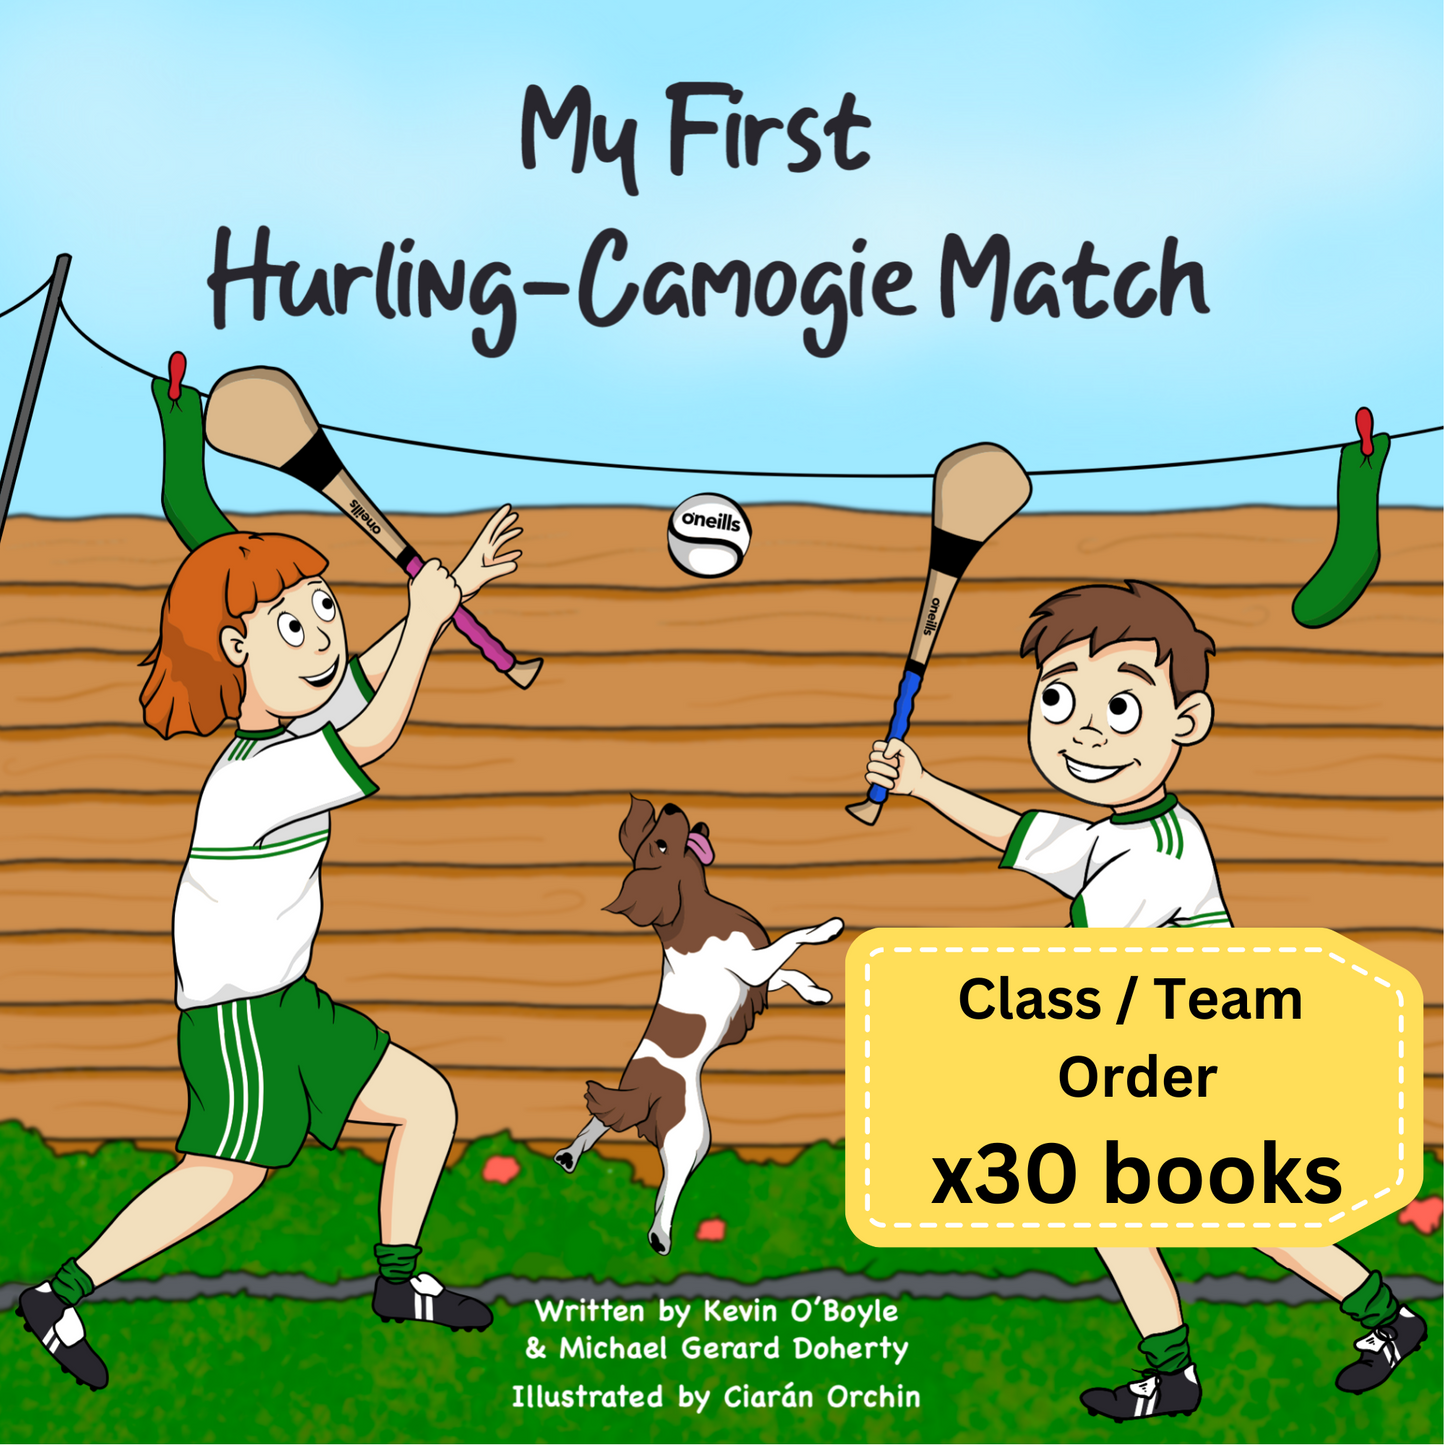 My First Hurling-Camogie Match (Class/Team Pack x30 books)